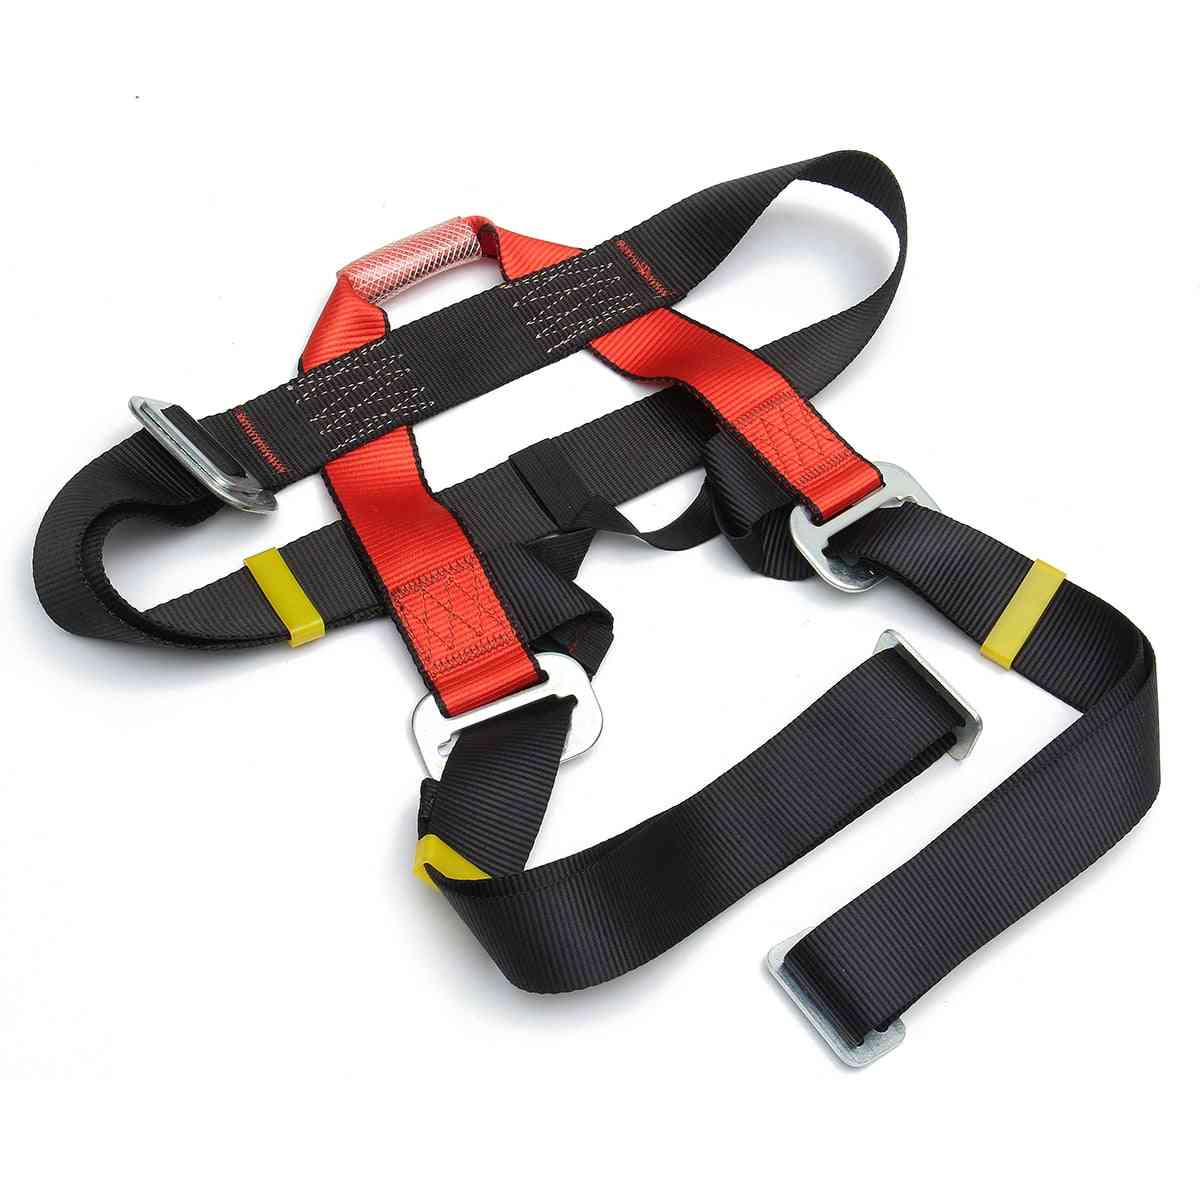 Outdoor Climbing Safety Belt Half Body Protecting For Rock Climbing Downhill Harnesses Rappel Belt Safety Climbing Accessories